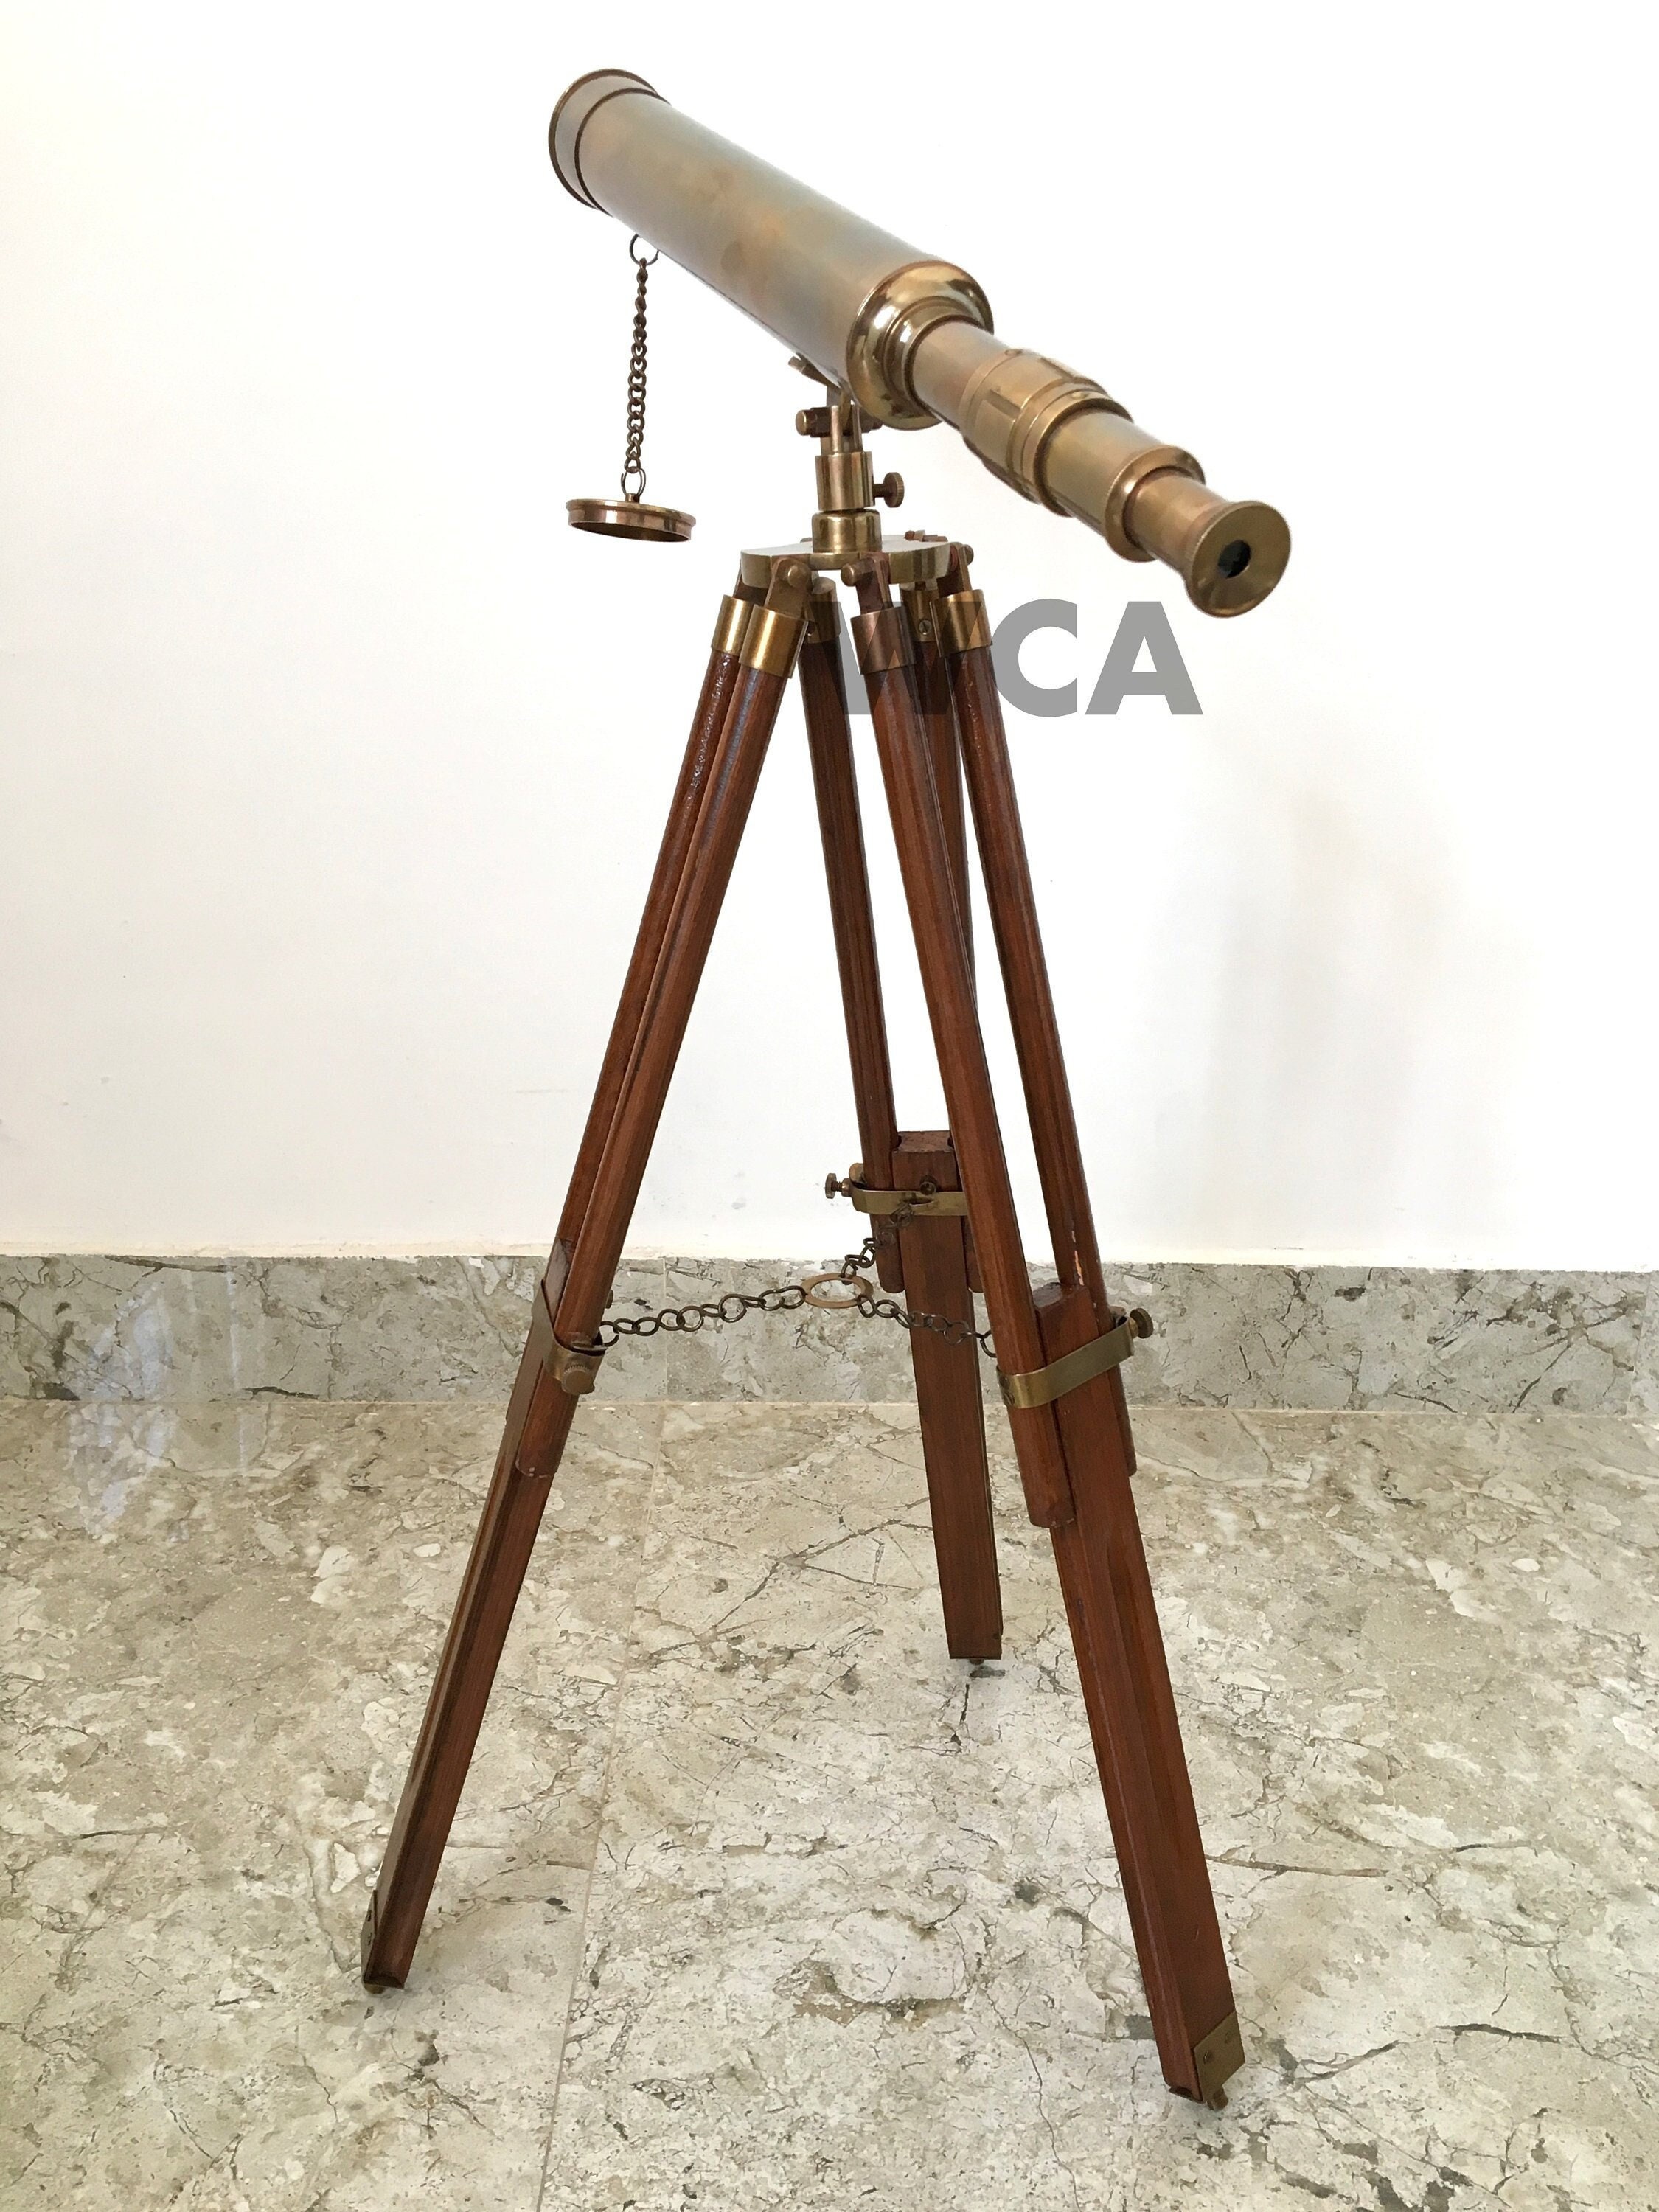 Details about   Nautical Brass Marine Telescope Spyglass Golden Finish With Wooden Tripod Stand 